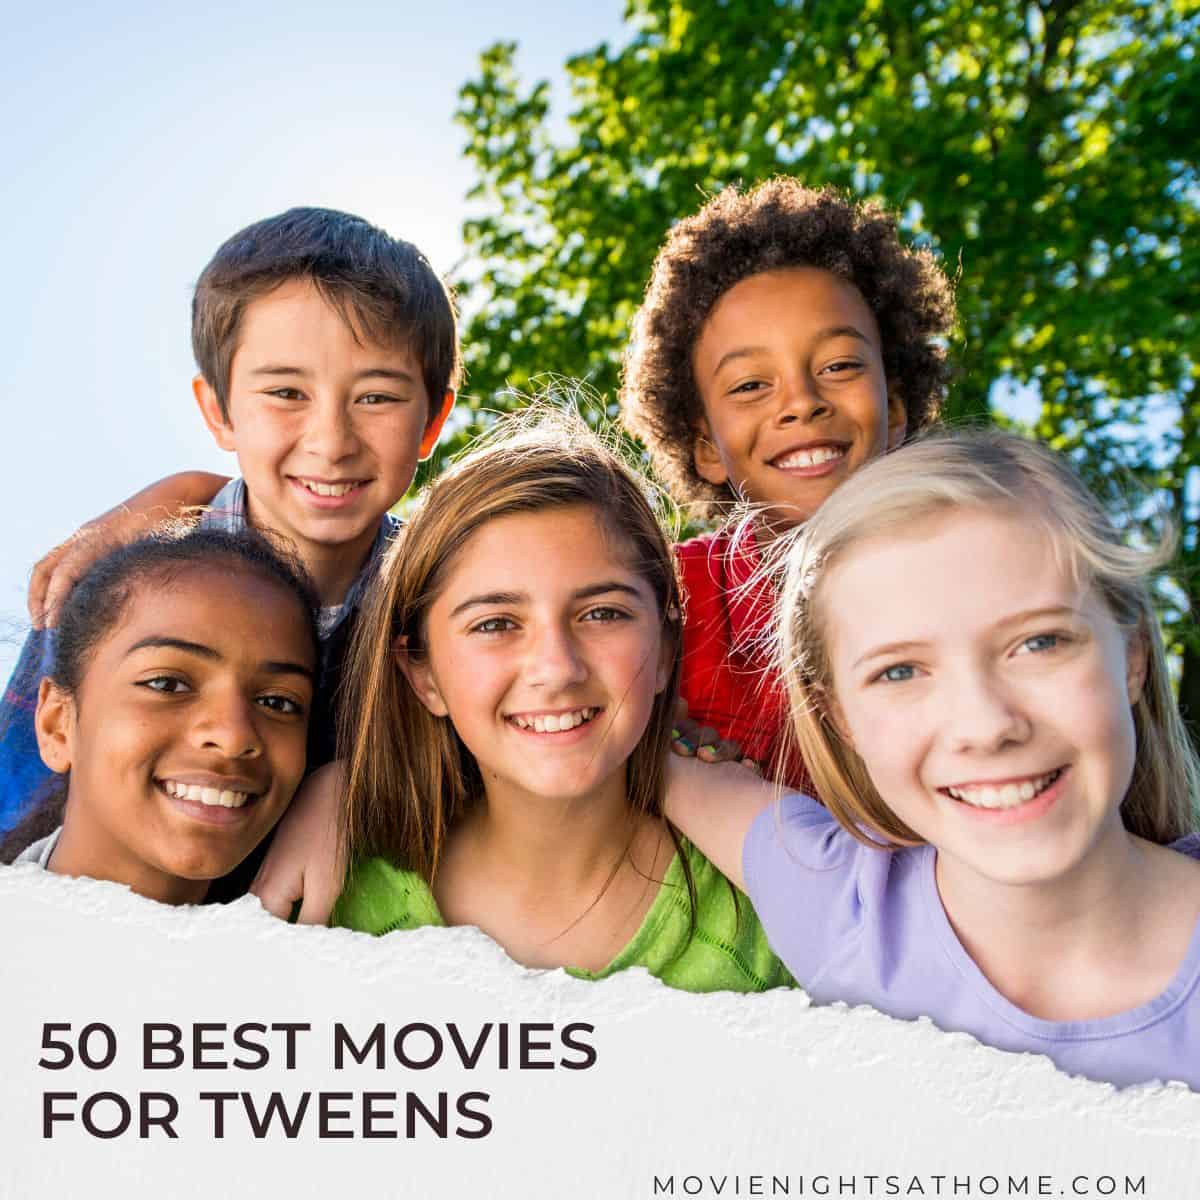 Top 9 best movies for 12 year olds 2022